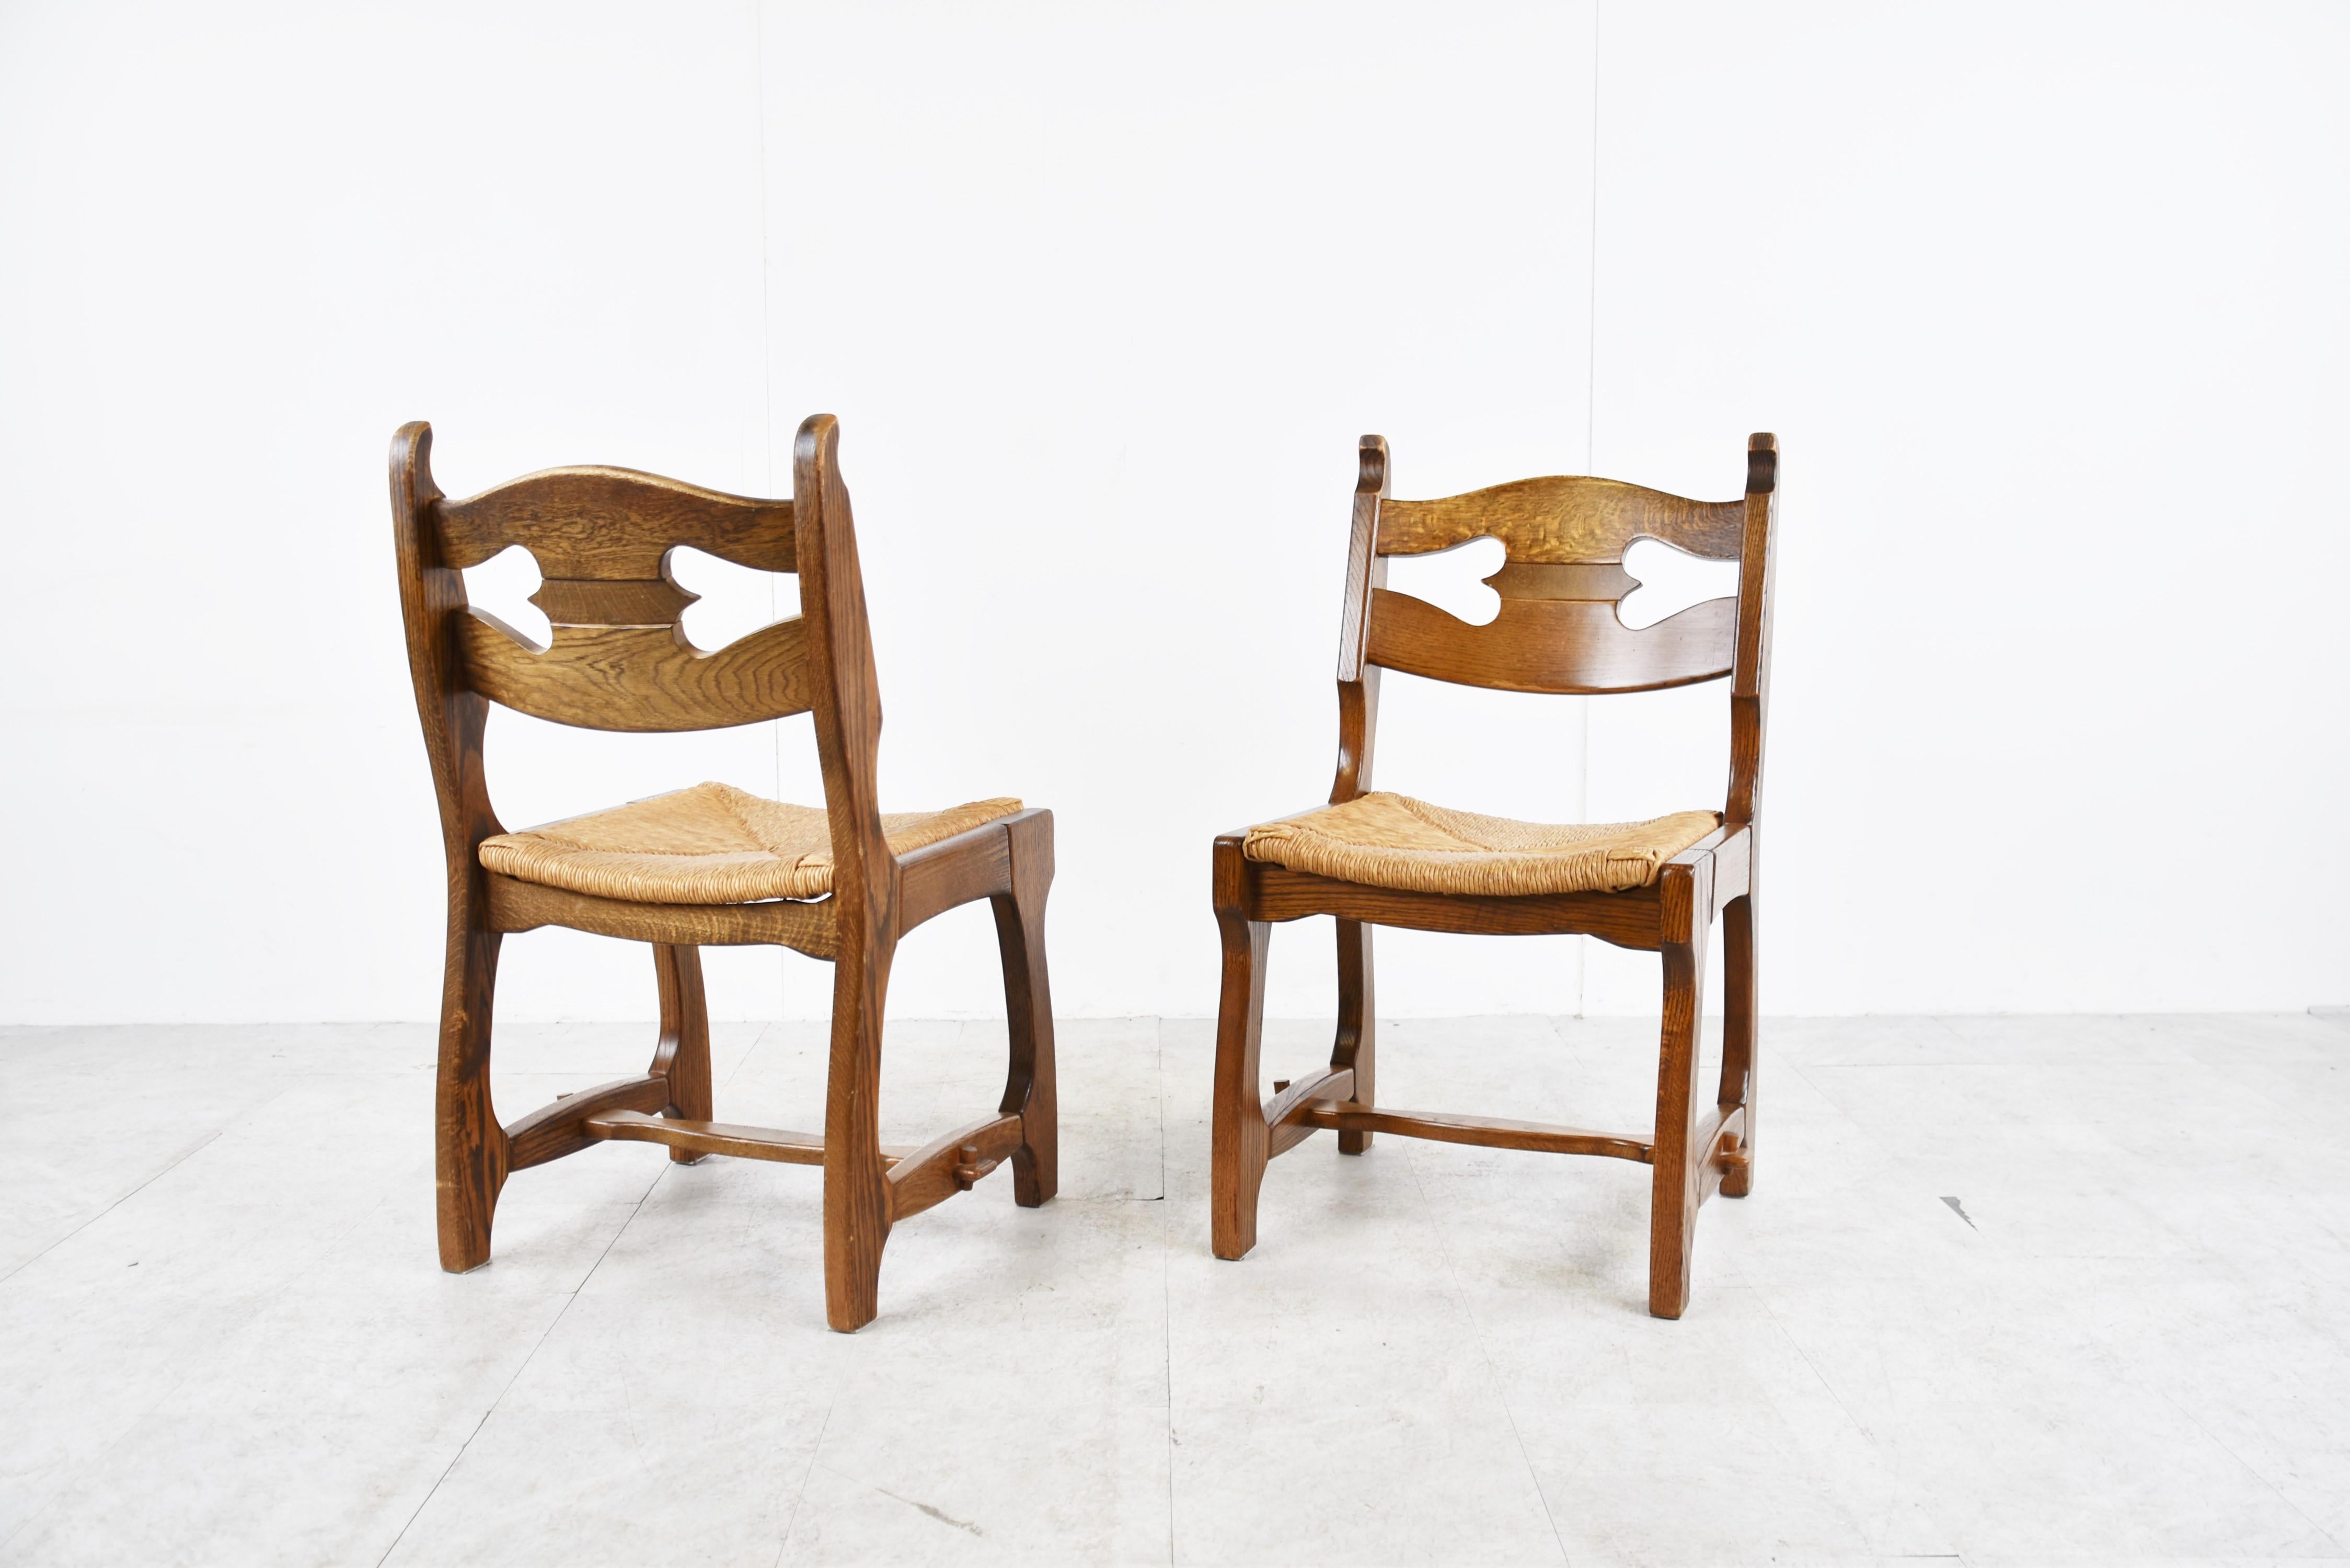 Vintage Oak and Wicker Brutalist Dining Chairs, 1960s For Sale 2